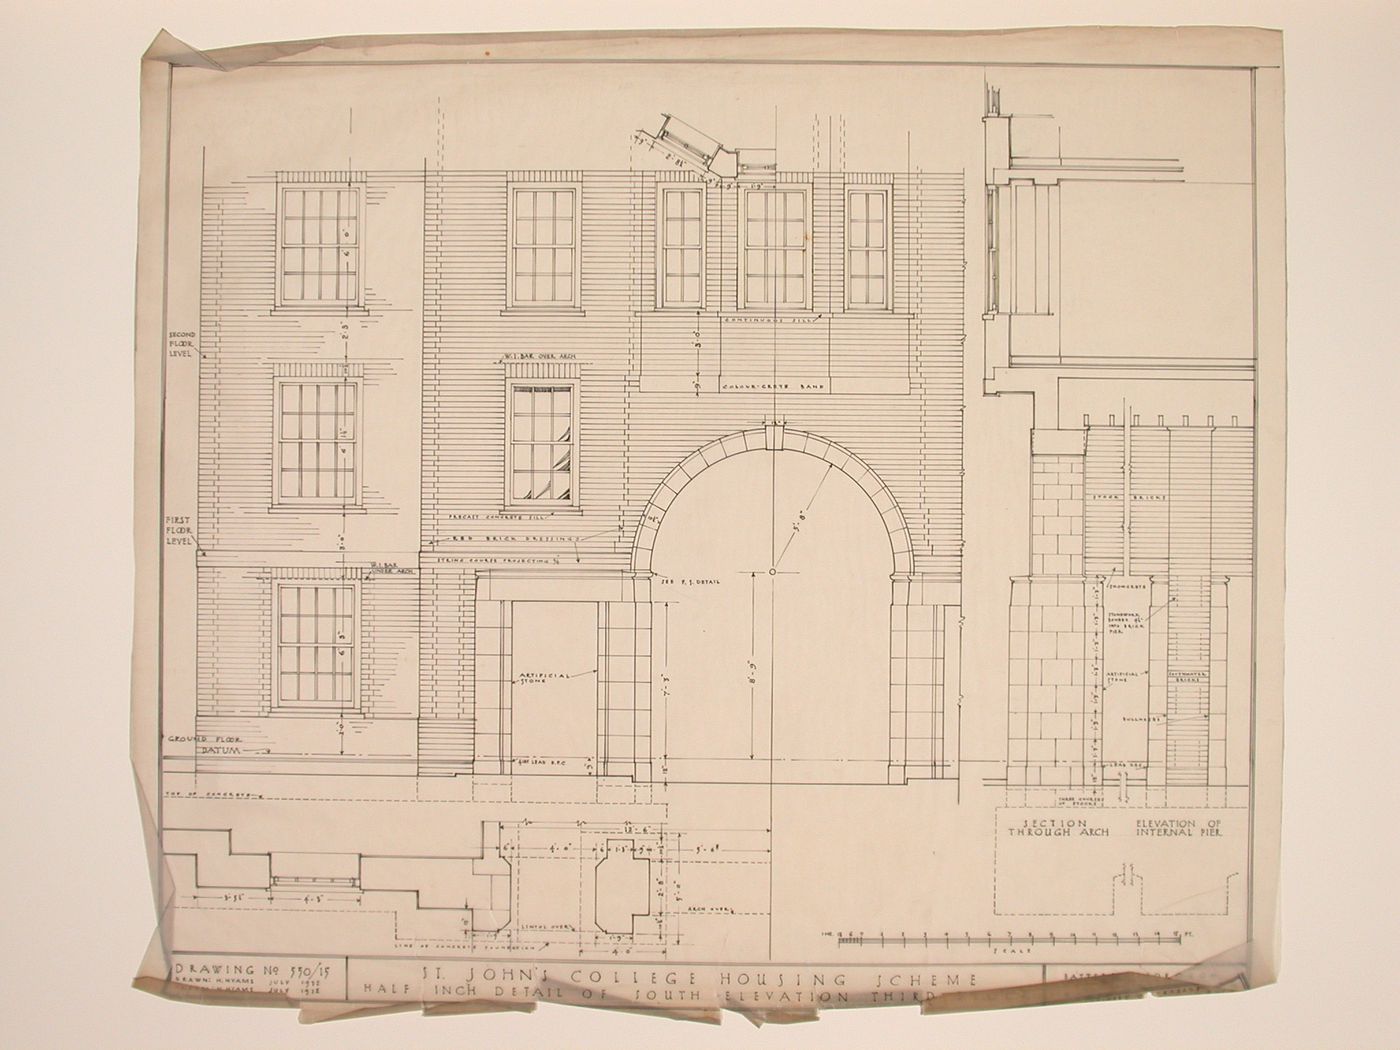 Detail for the south elevation of the third block of St. John's College site housing scheme